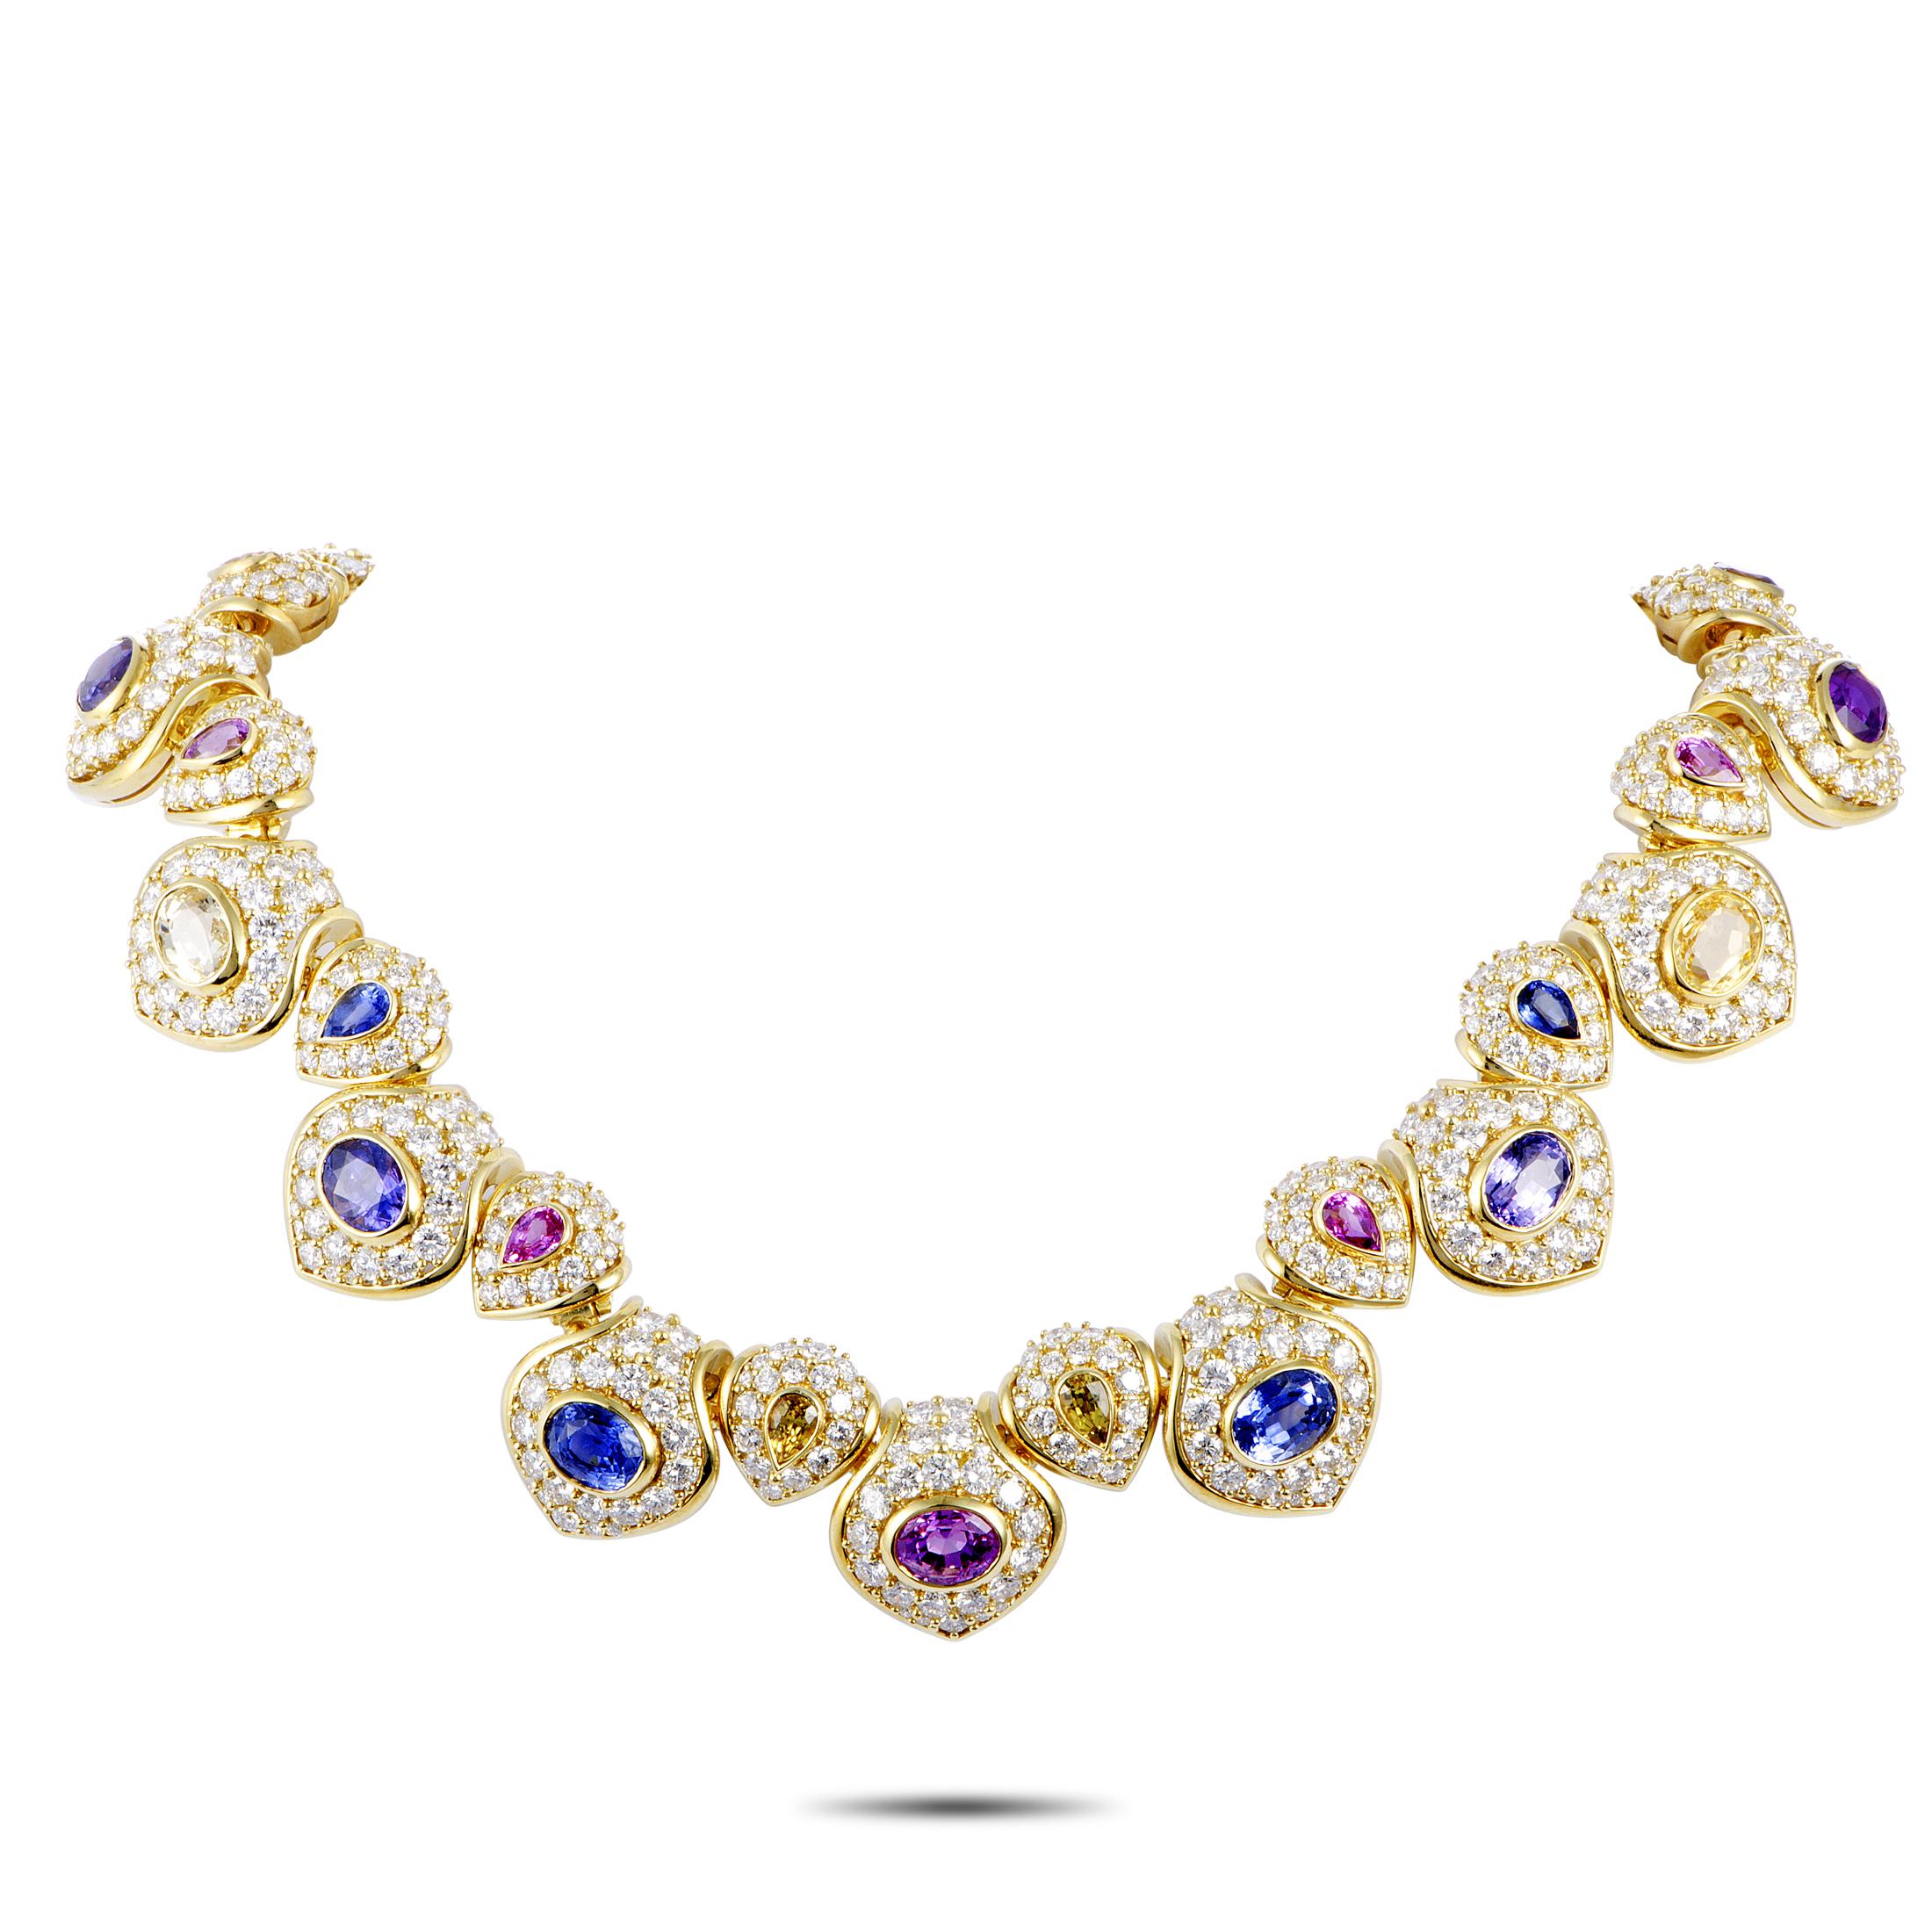 This Kurt Wayne set includes a necklace and a pair of earrings that are crafted from 18K yellow gold and set with yellow, blue and pink sapphires that amount to 55.00 carats, and with a total of approximately 52.00 carats of diamonds boasting F